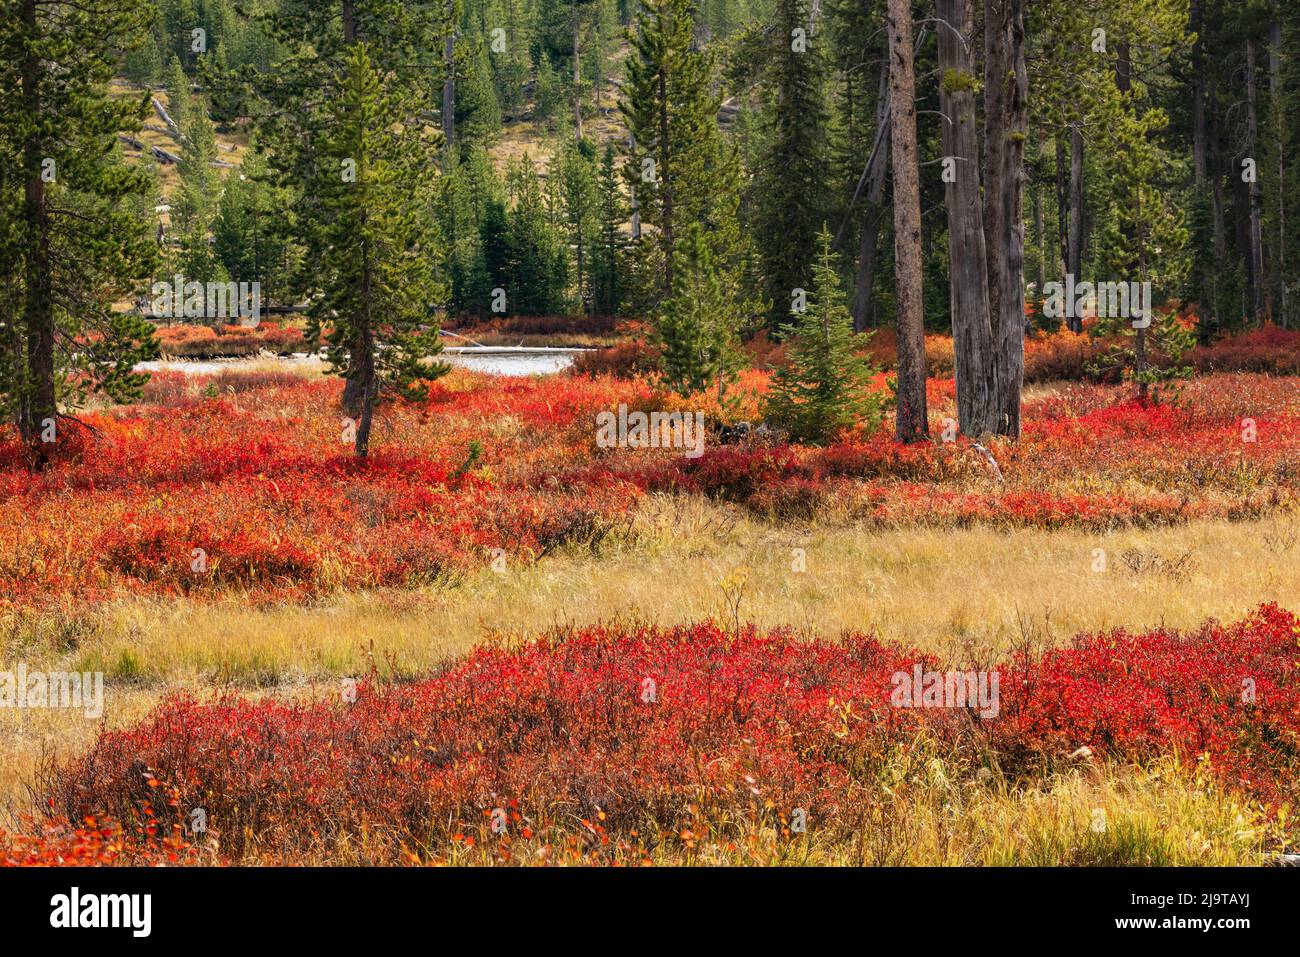 Blueberry leaves in autumn red coloration, Yellowstone National Park, Wyoming Stock Photo